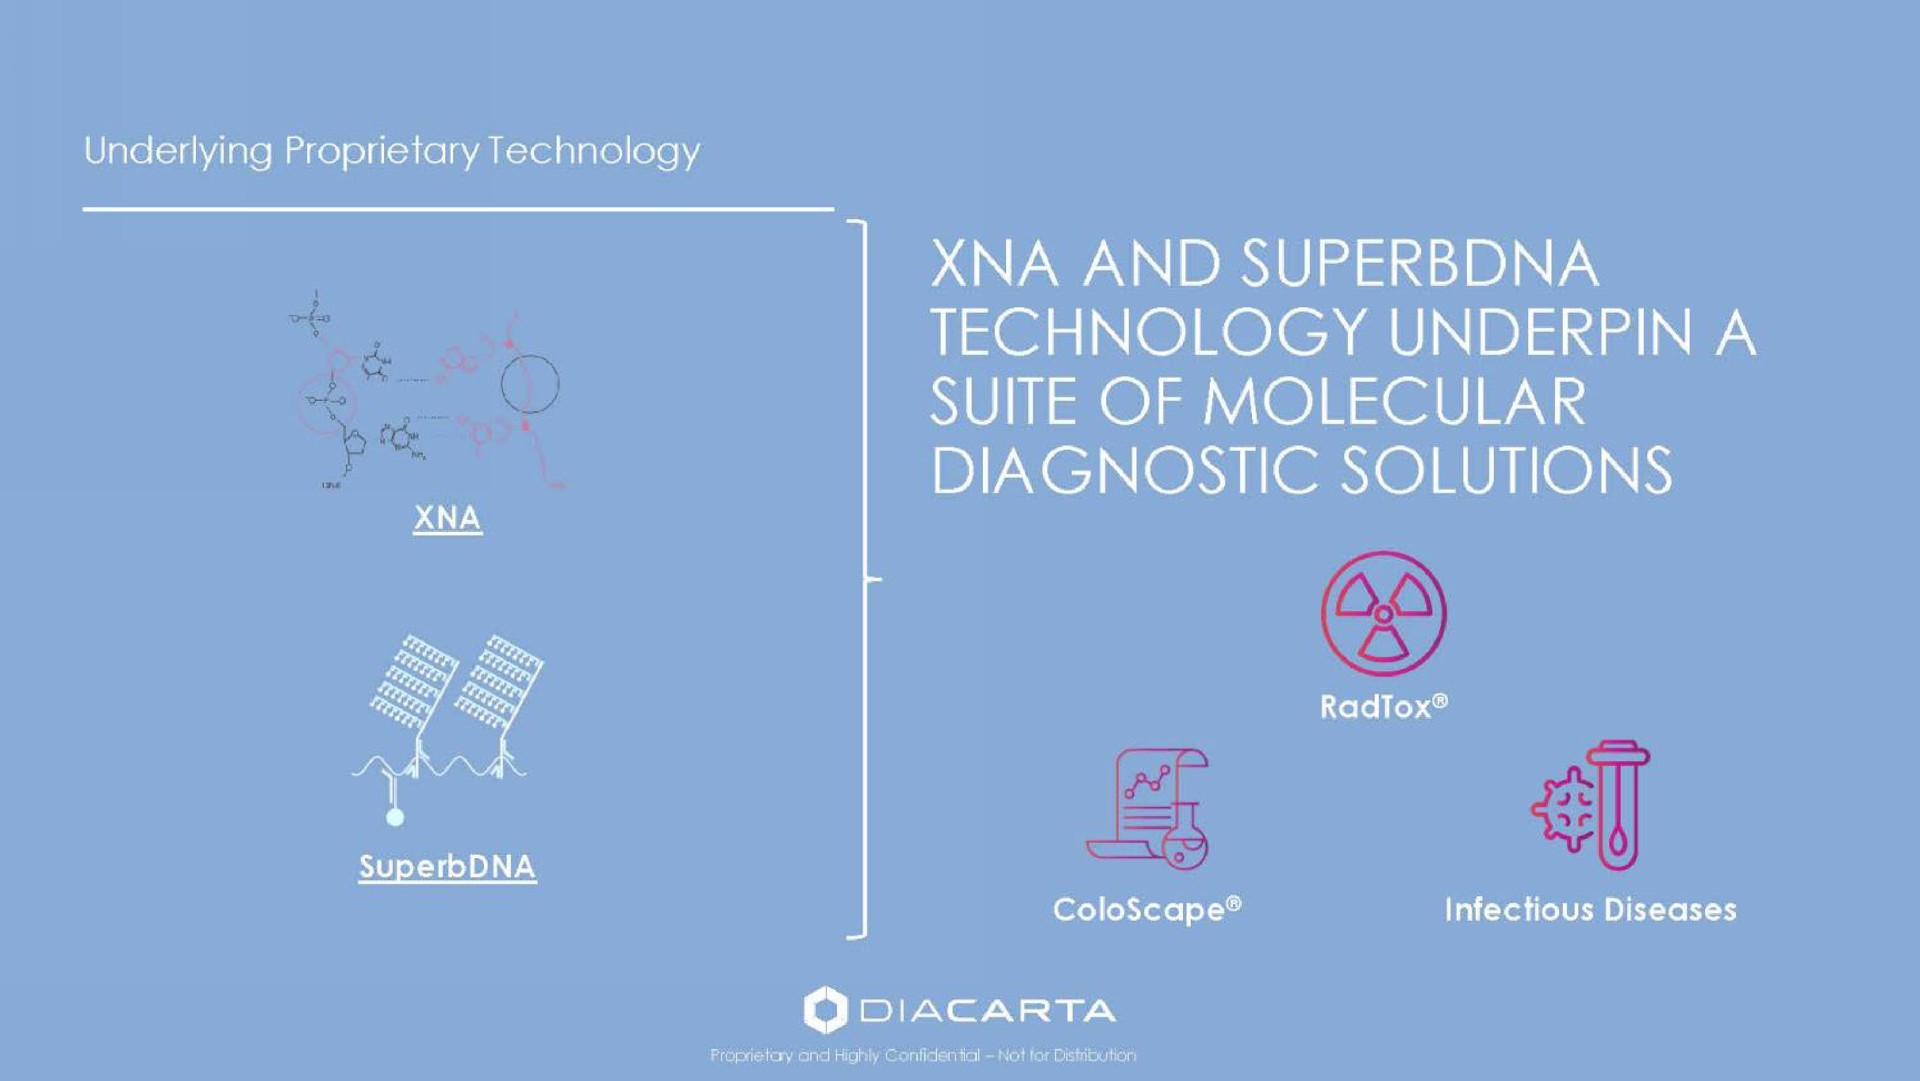 a and technology underpin a suite of molecular diagnostic solutions | DiaCarta